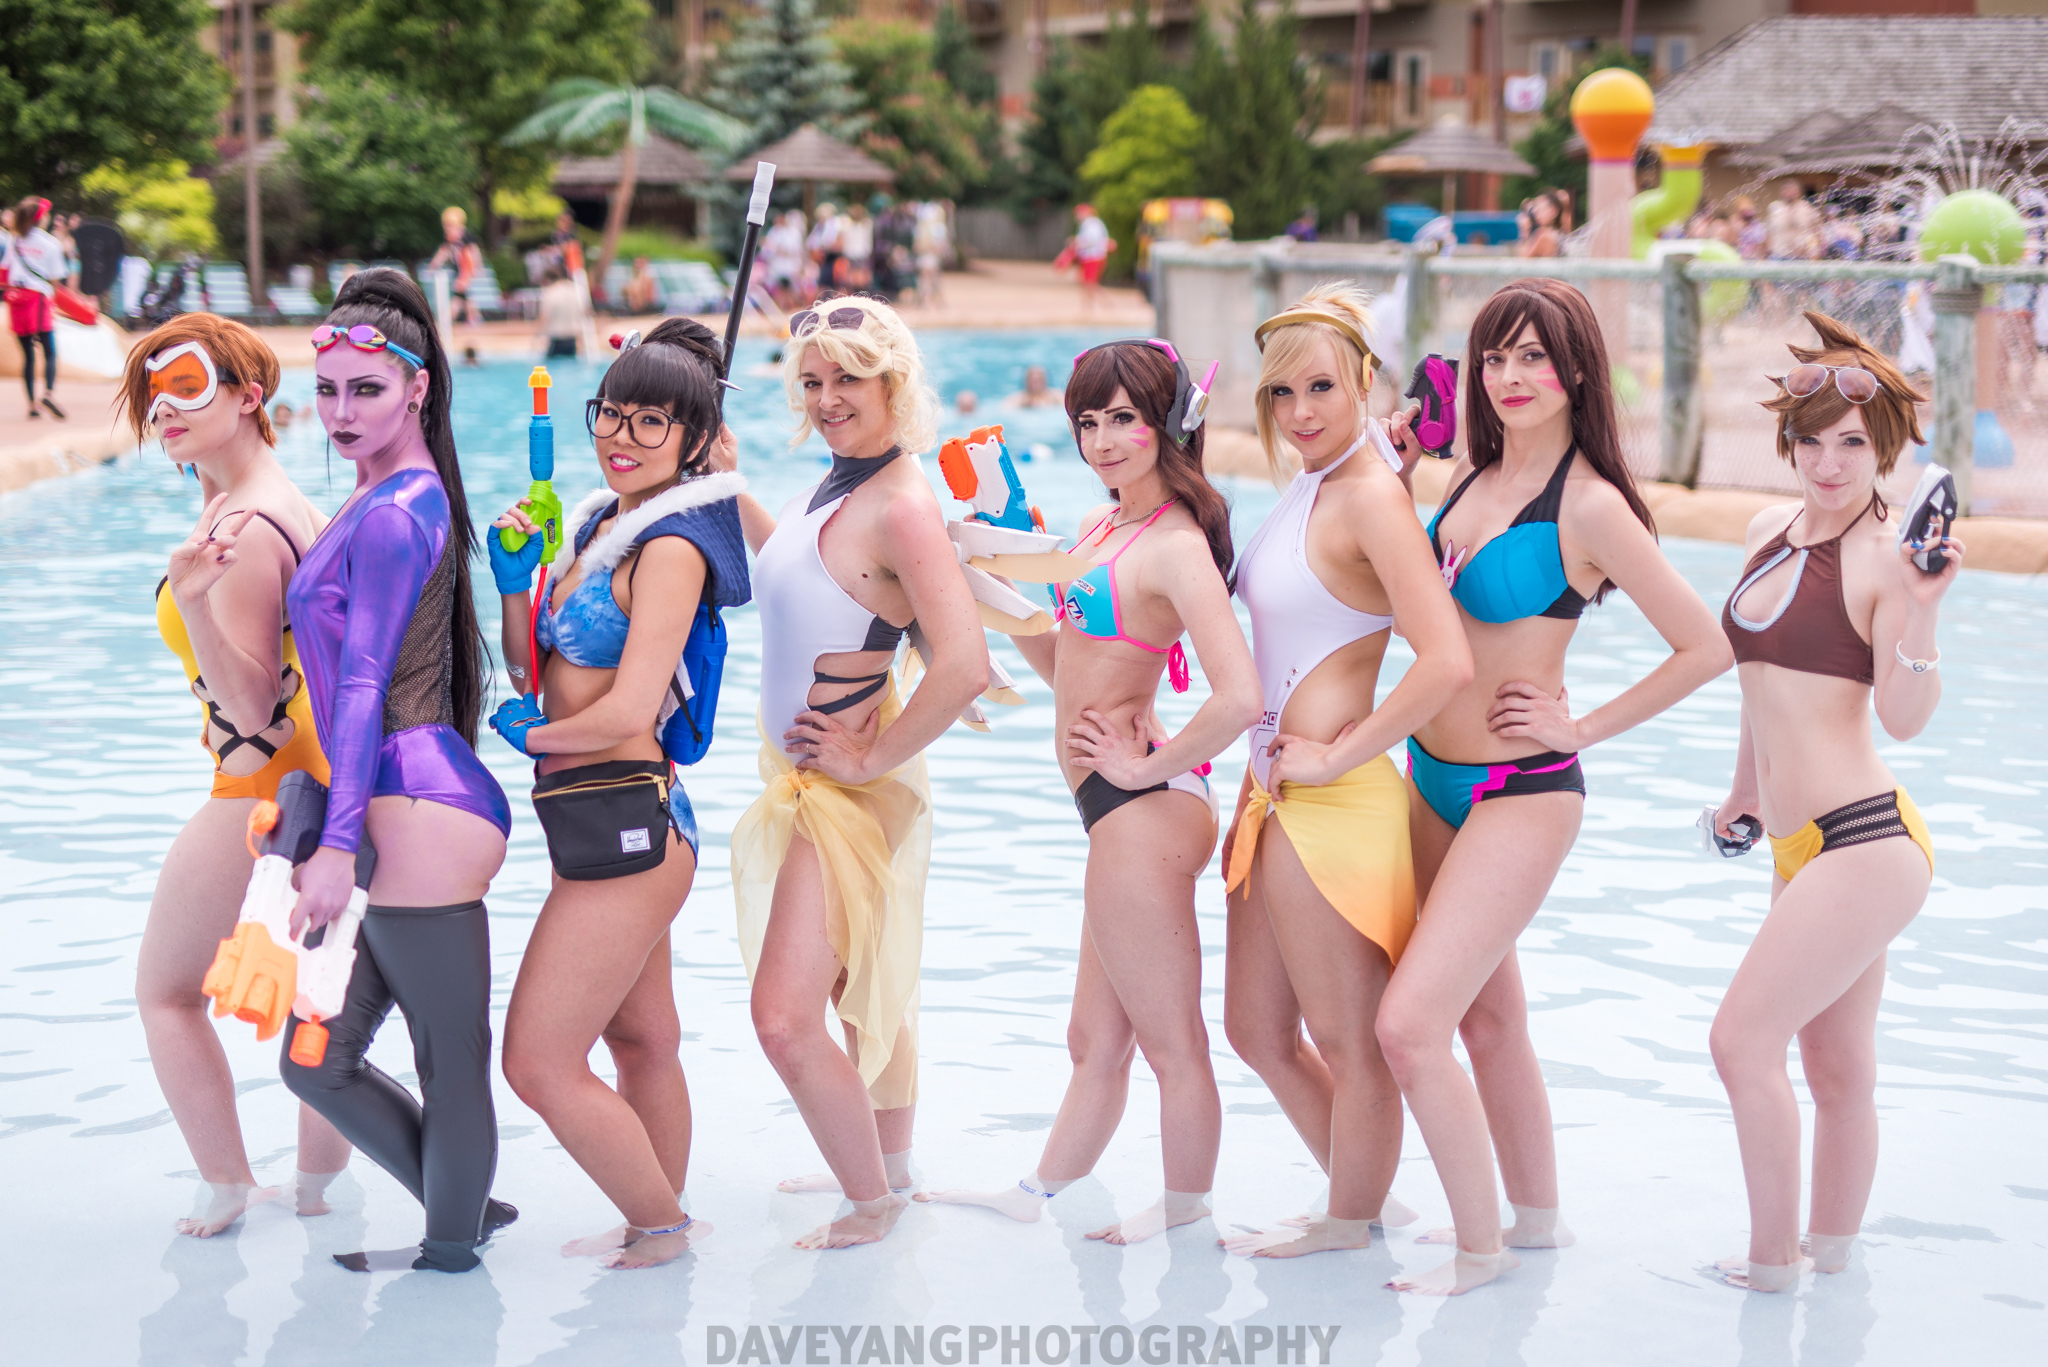 Some Of 2016’s Best Cosplay Was At Colossalcon